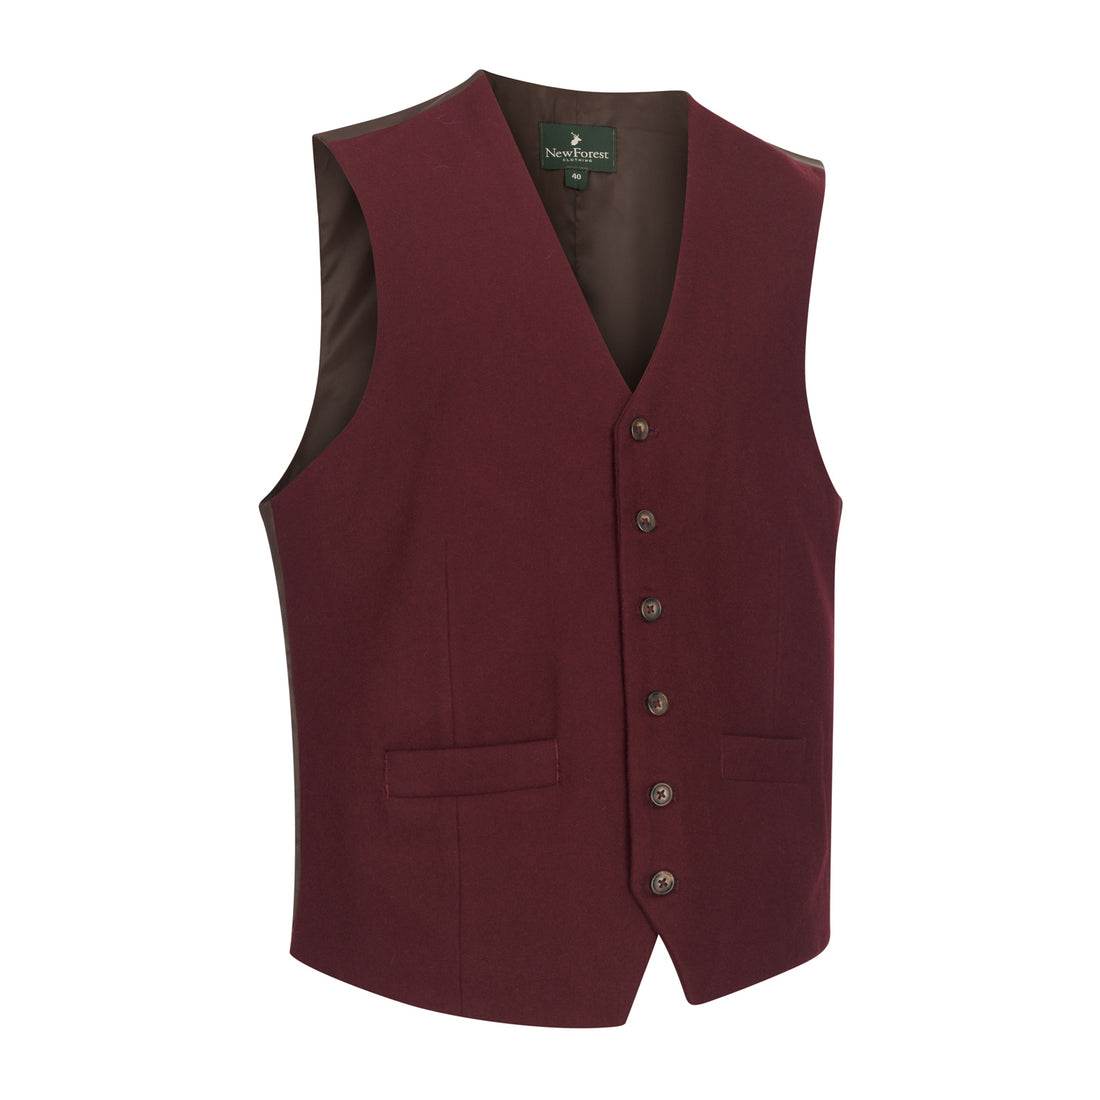 New-Forest-Wool-Mix-Waistcoat